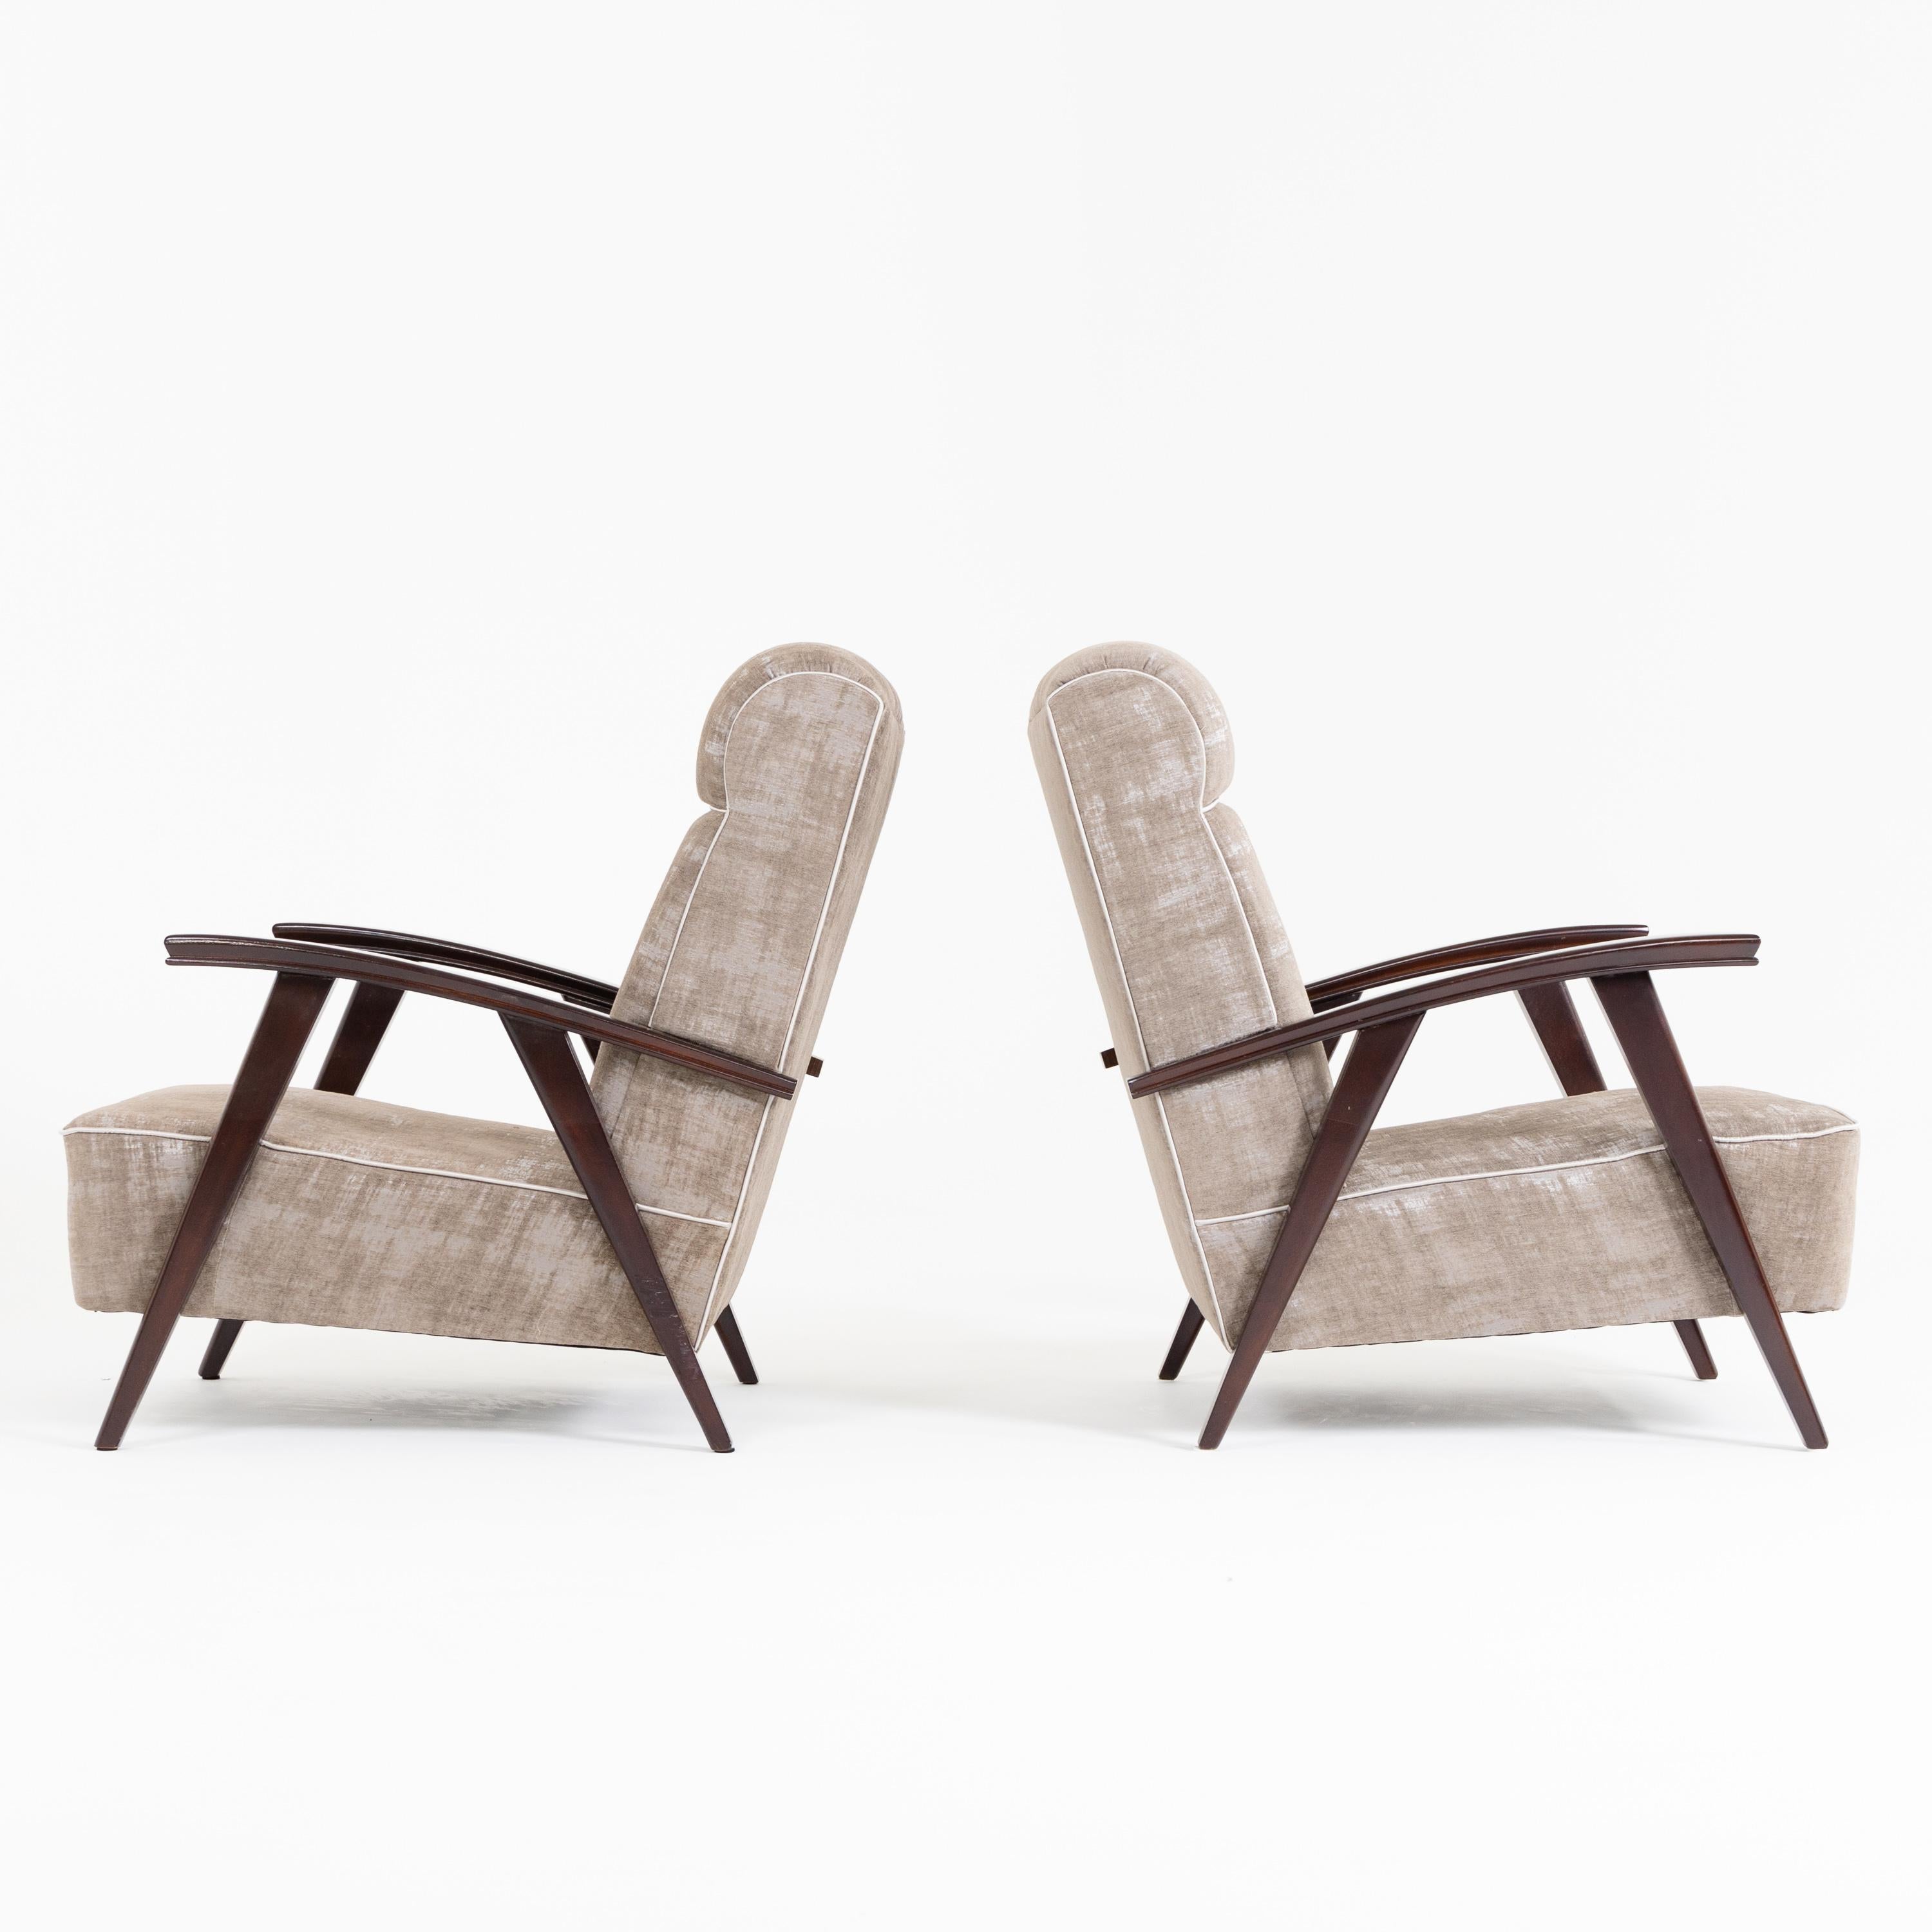 Mid-20th Century Pair of Modernist Armchairs Attributed to Jacques Adnet